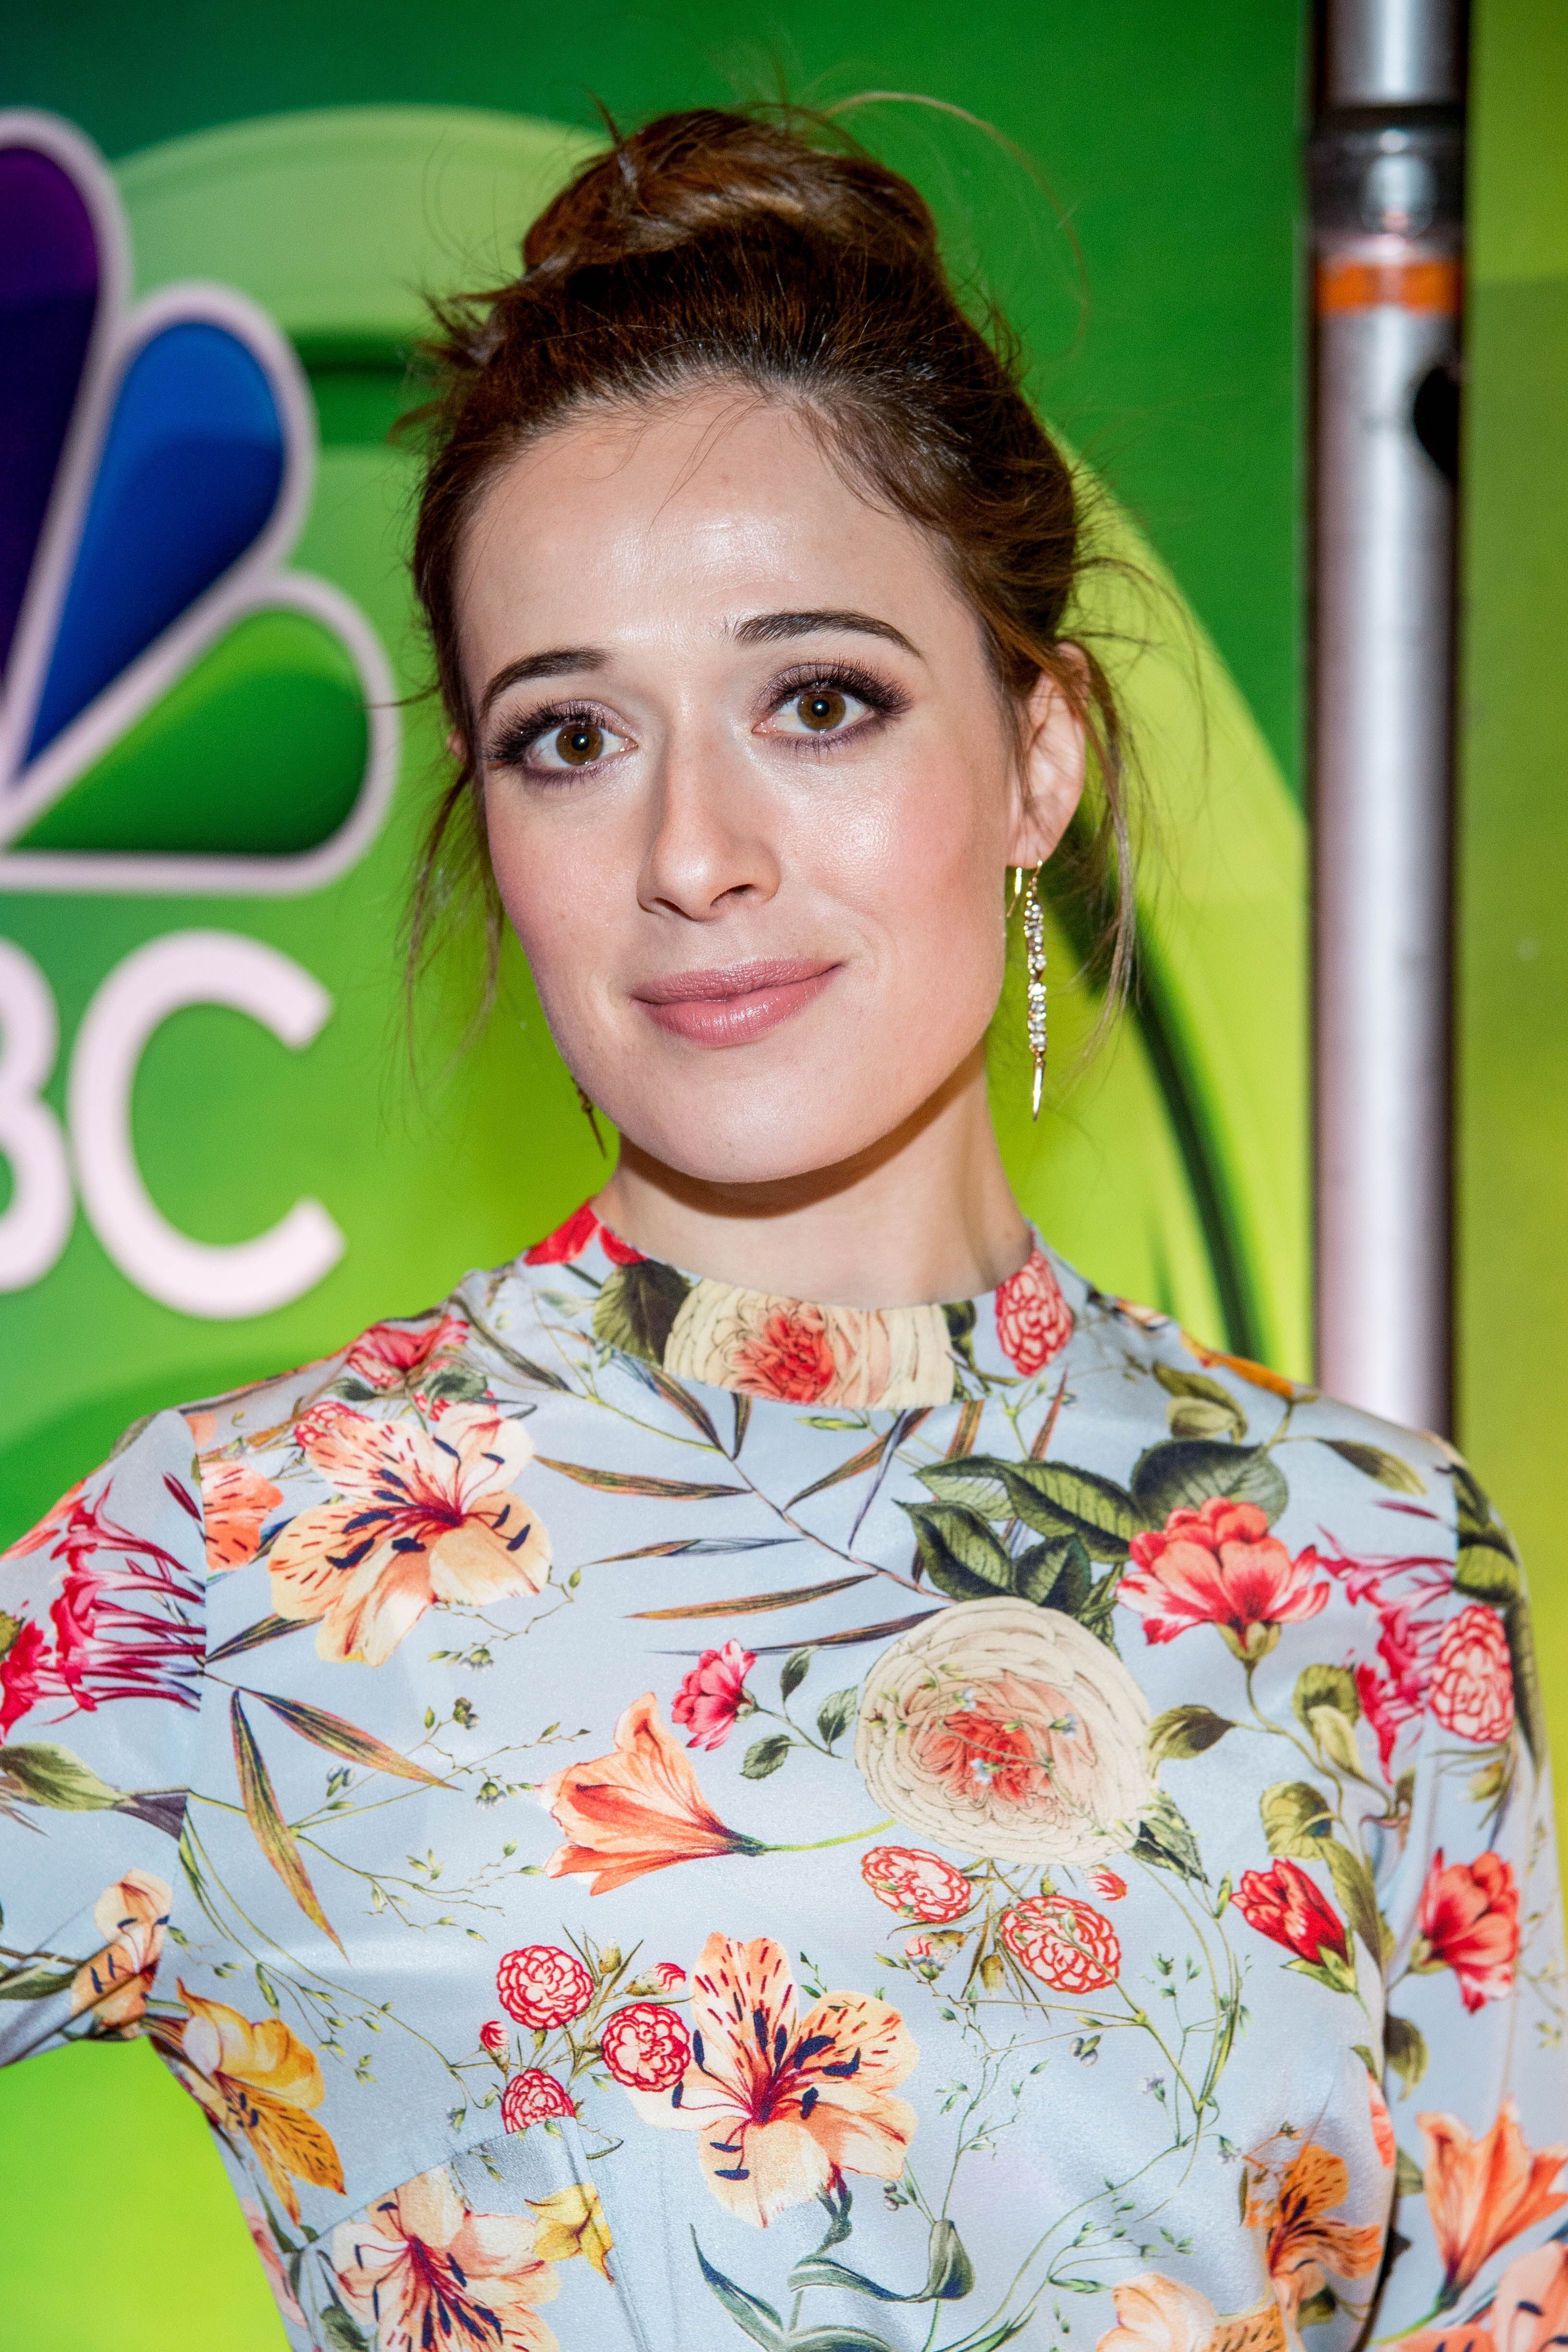 Marina Squerciati attends NBC's New York mid season press junket at Four Seasons Hotel New York on March 8, 2018 in New York City | Photo: Getty Images